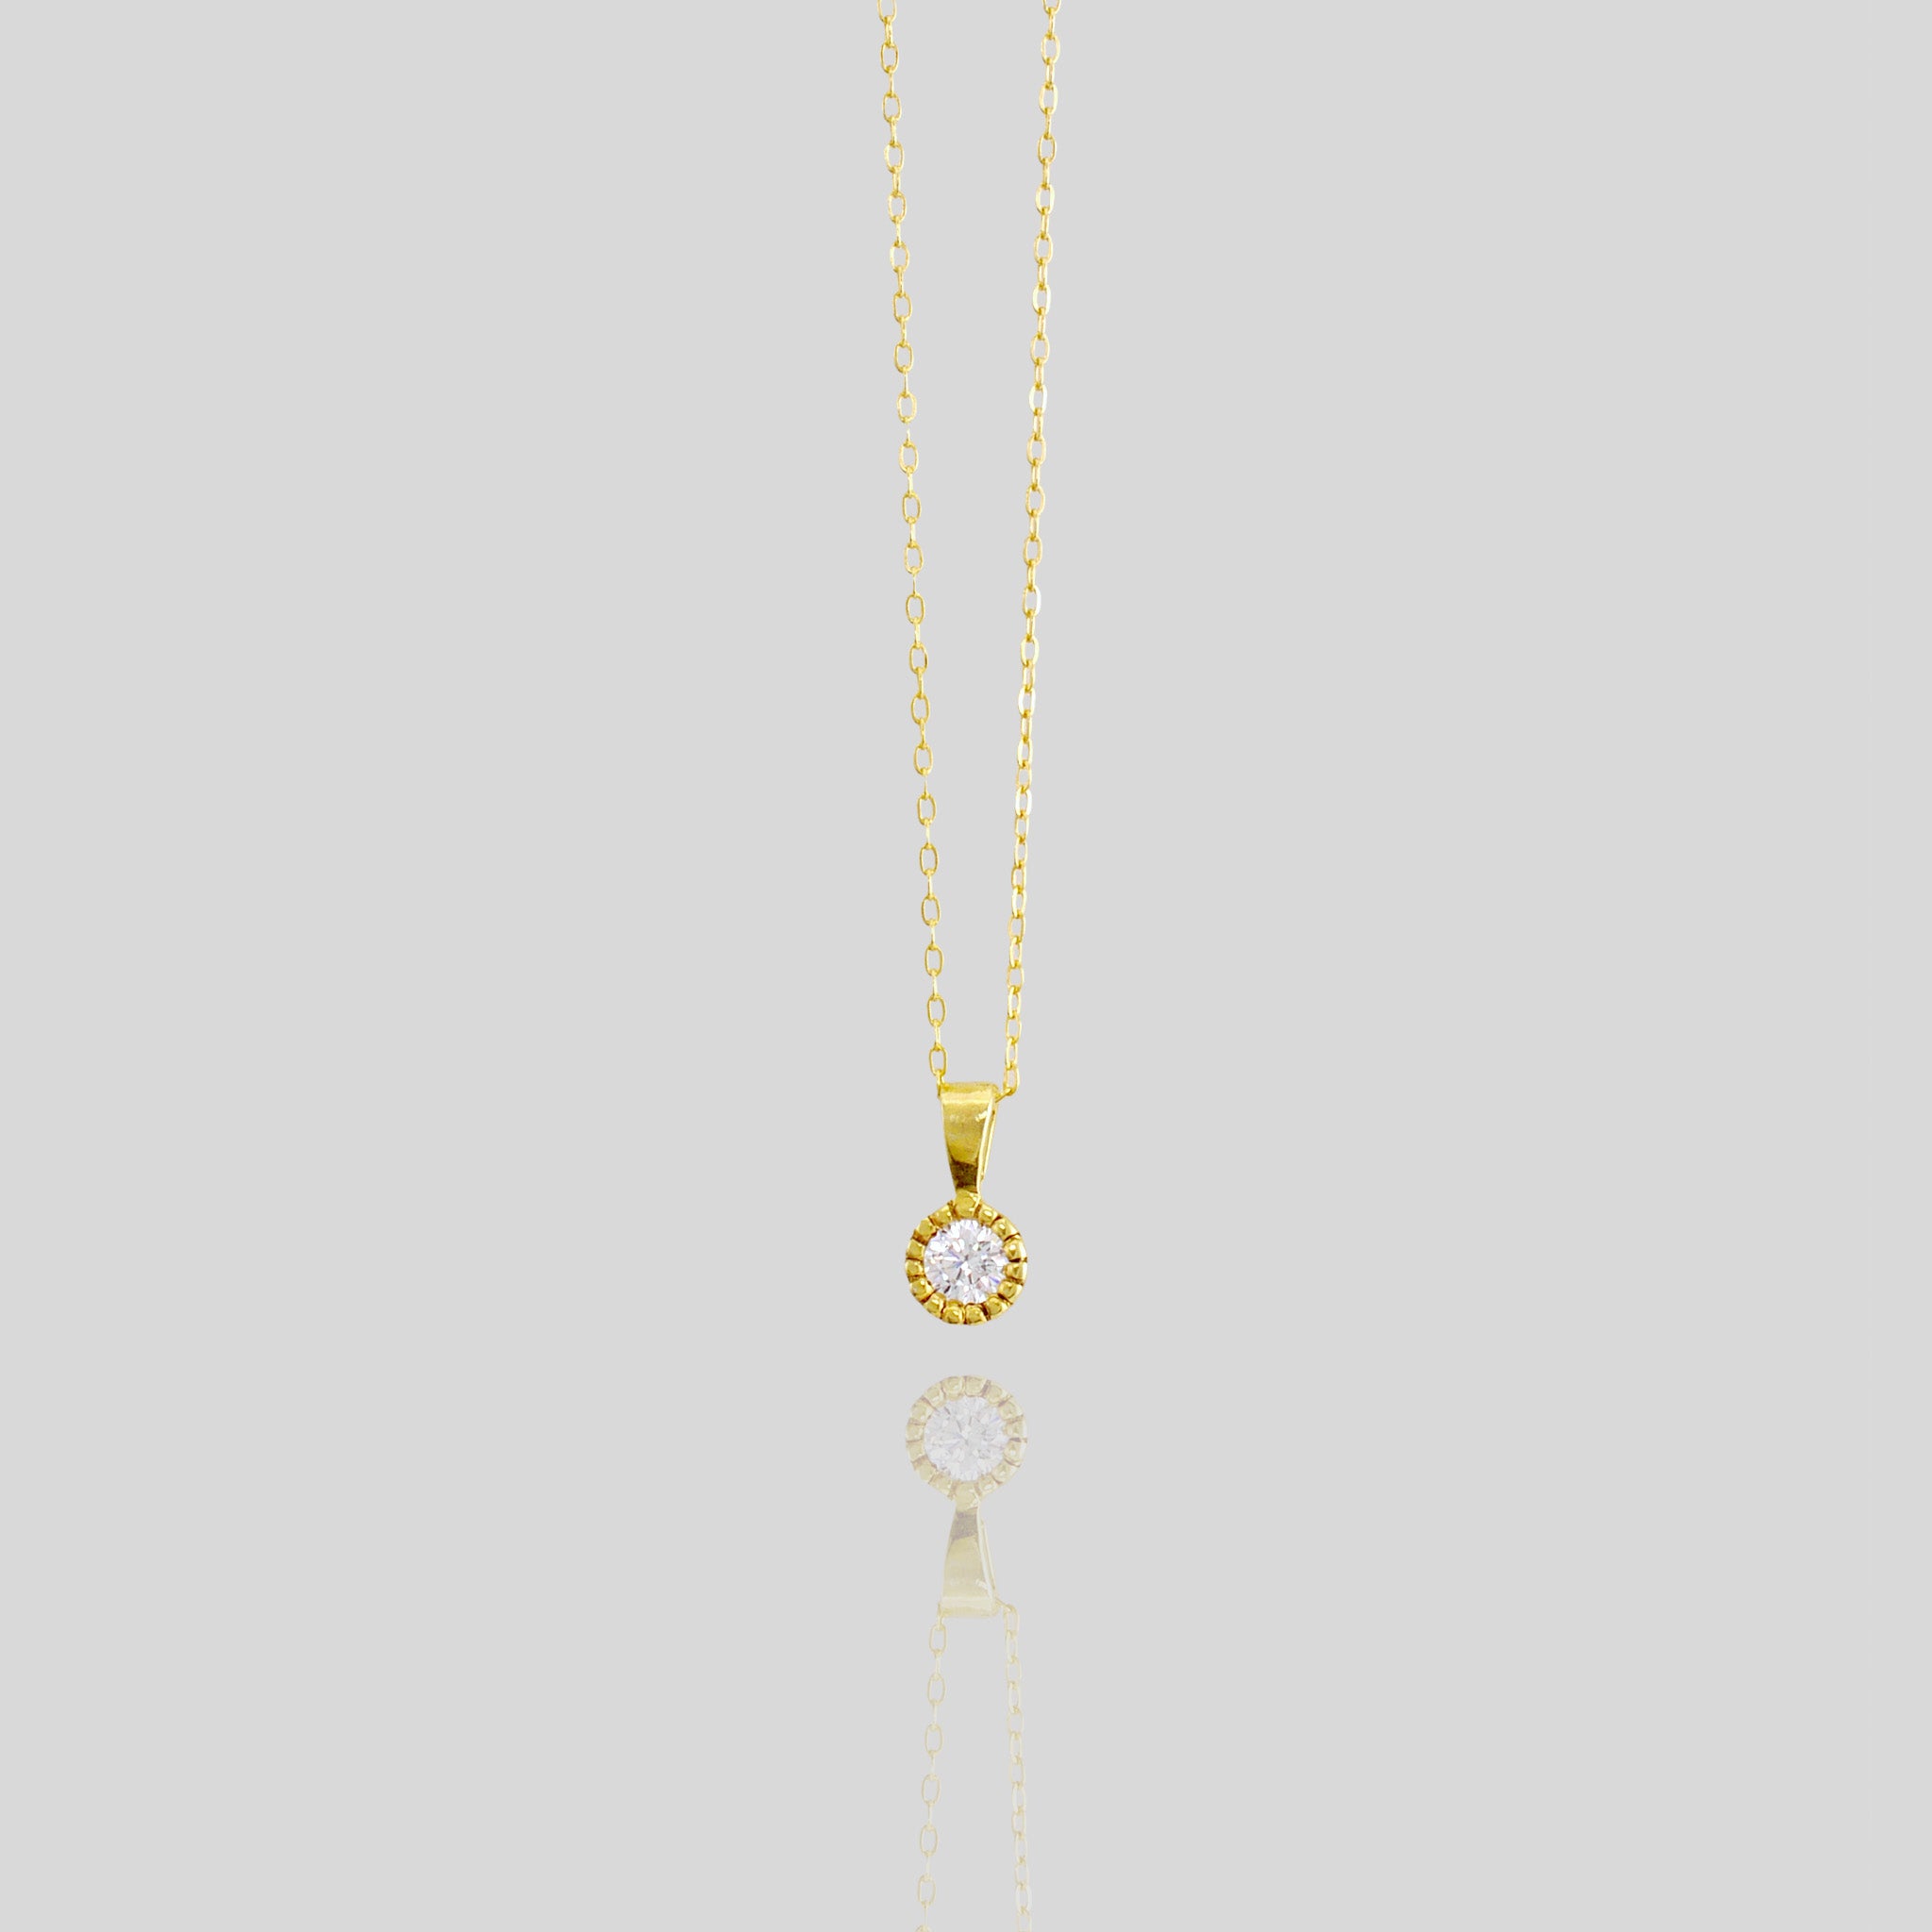 Elegant round gold pendant with embroidered texture and central diamond, exuding classic sophistication.